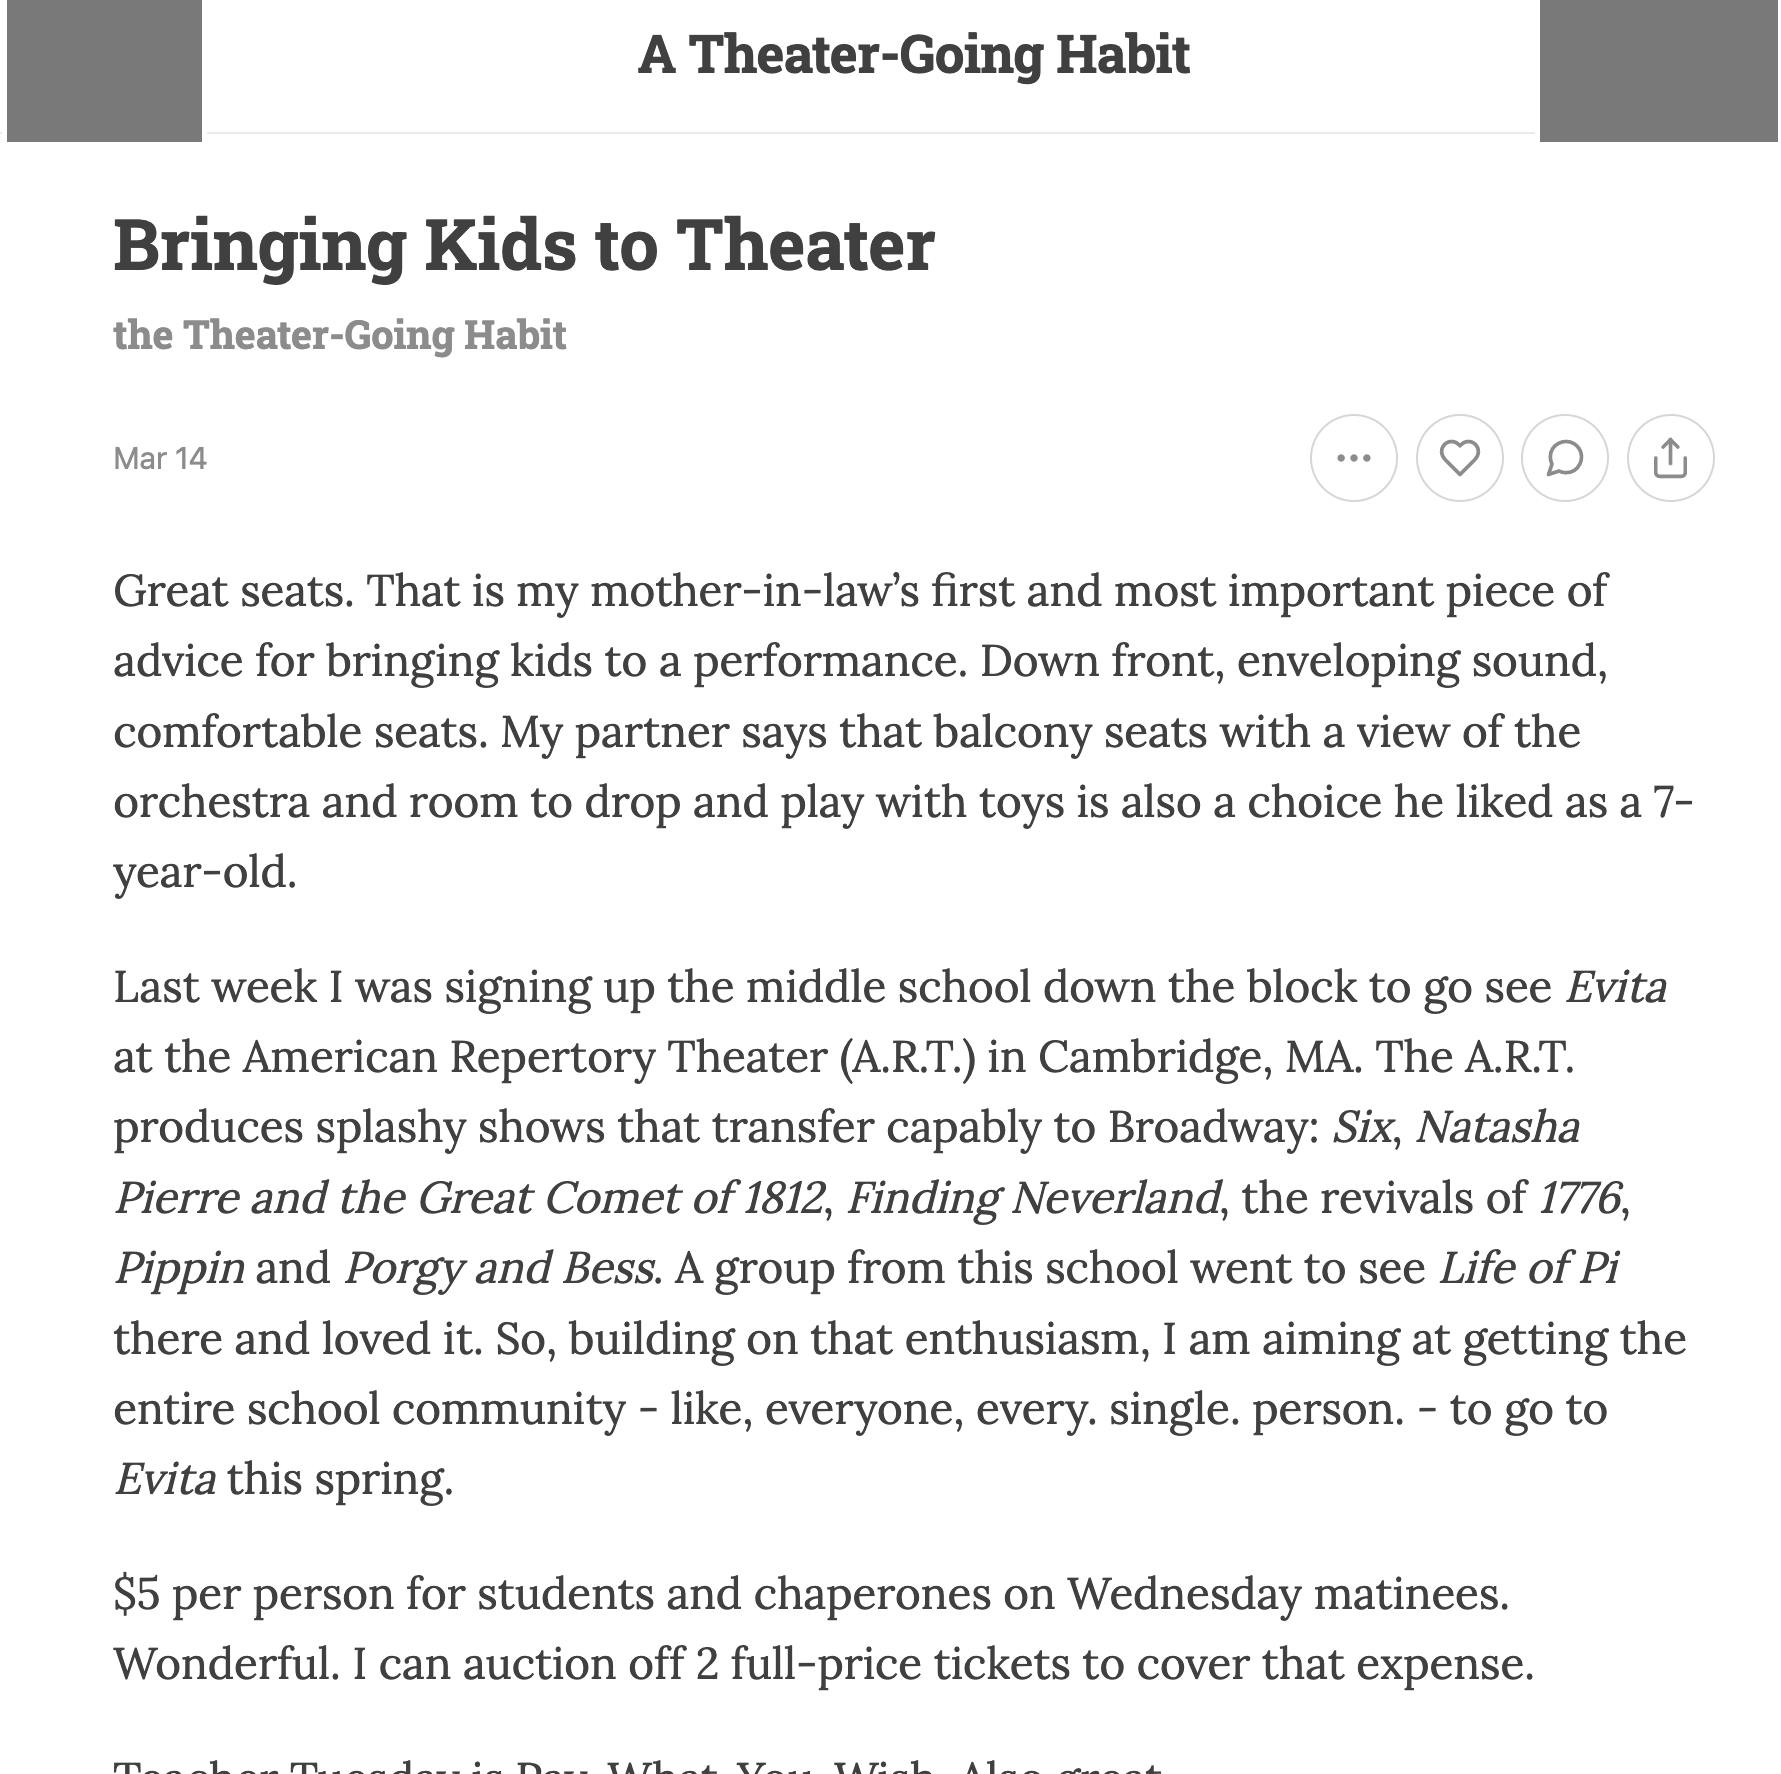 A Theater-Going Habit, Newsletter and Community by Katie O’Neill